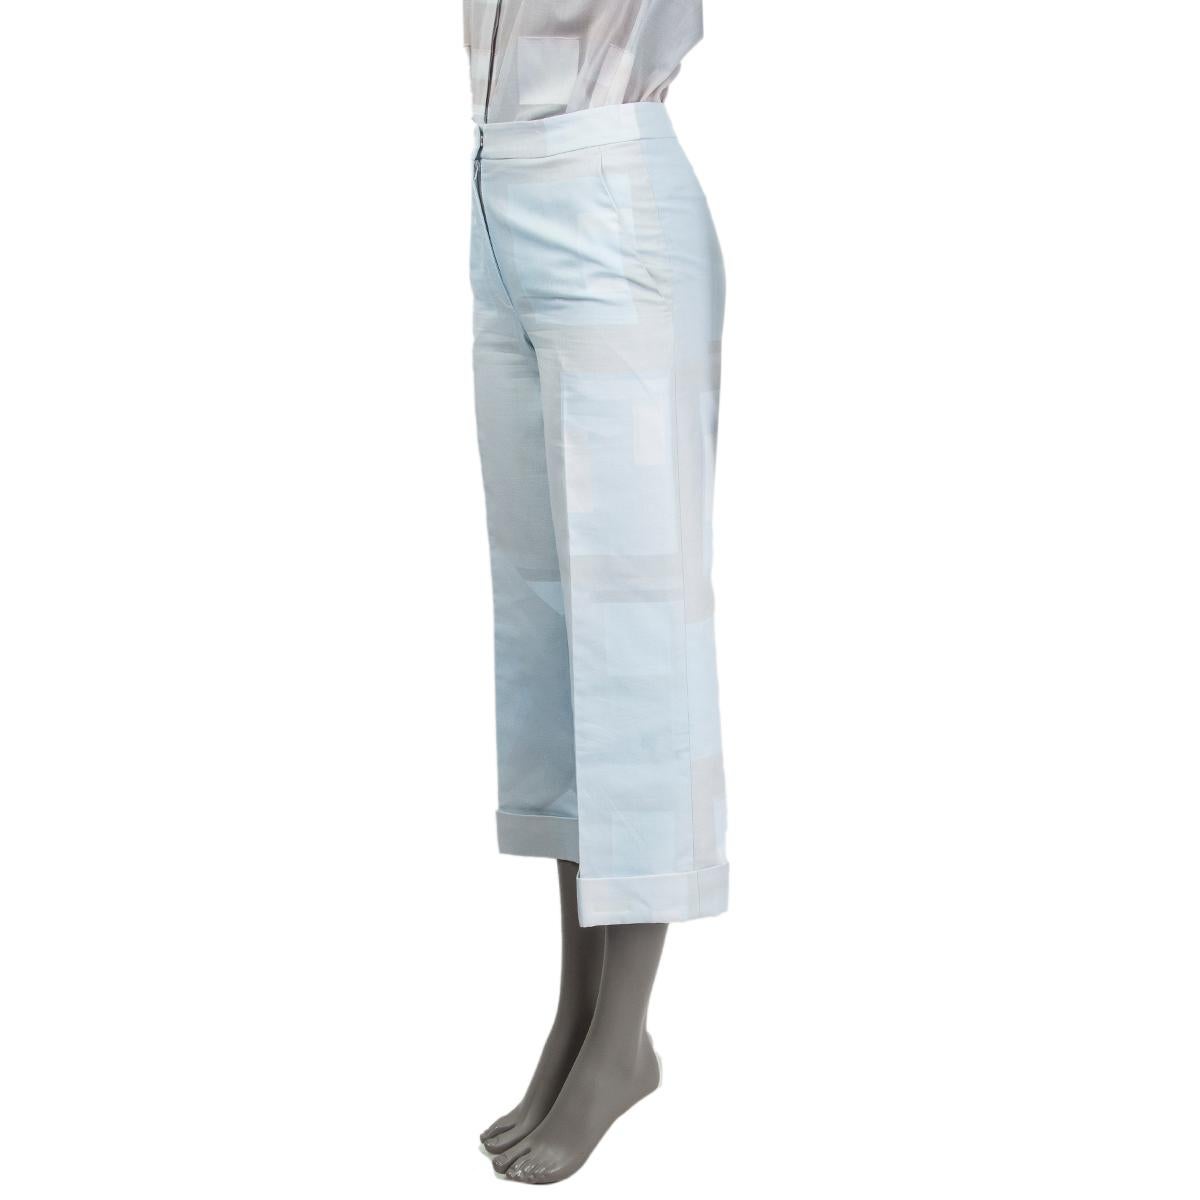 100% authentic Akris square print 3/4 cuffed pants in light blue, light grey and white cotton (100%) with slit pockets. Closes on the front with a concealed zipper and hook fastener. Partially lined in viscose (100%). Has been worn and is in